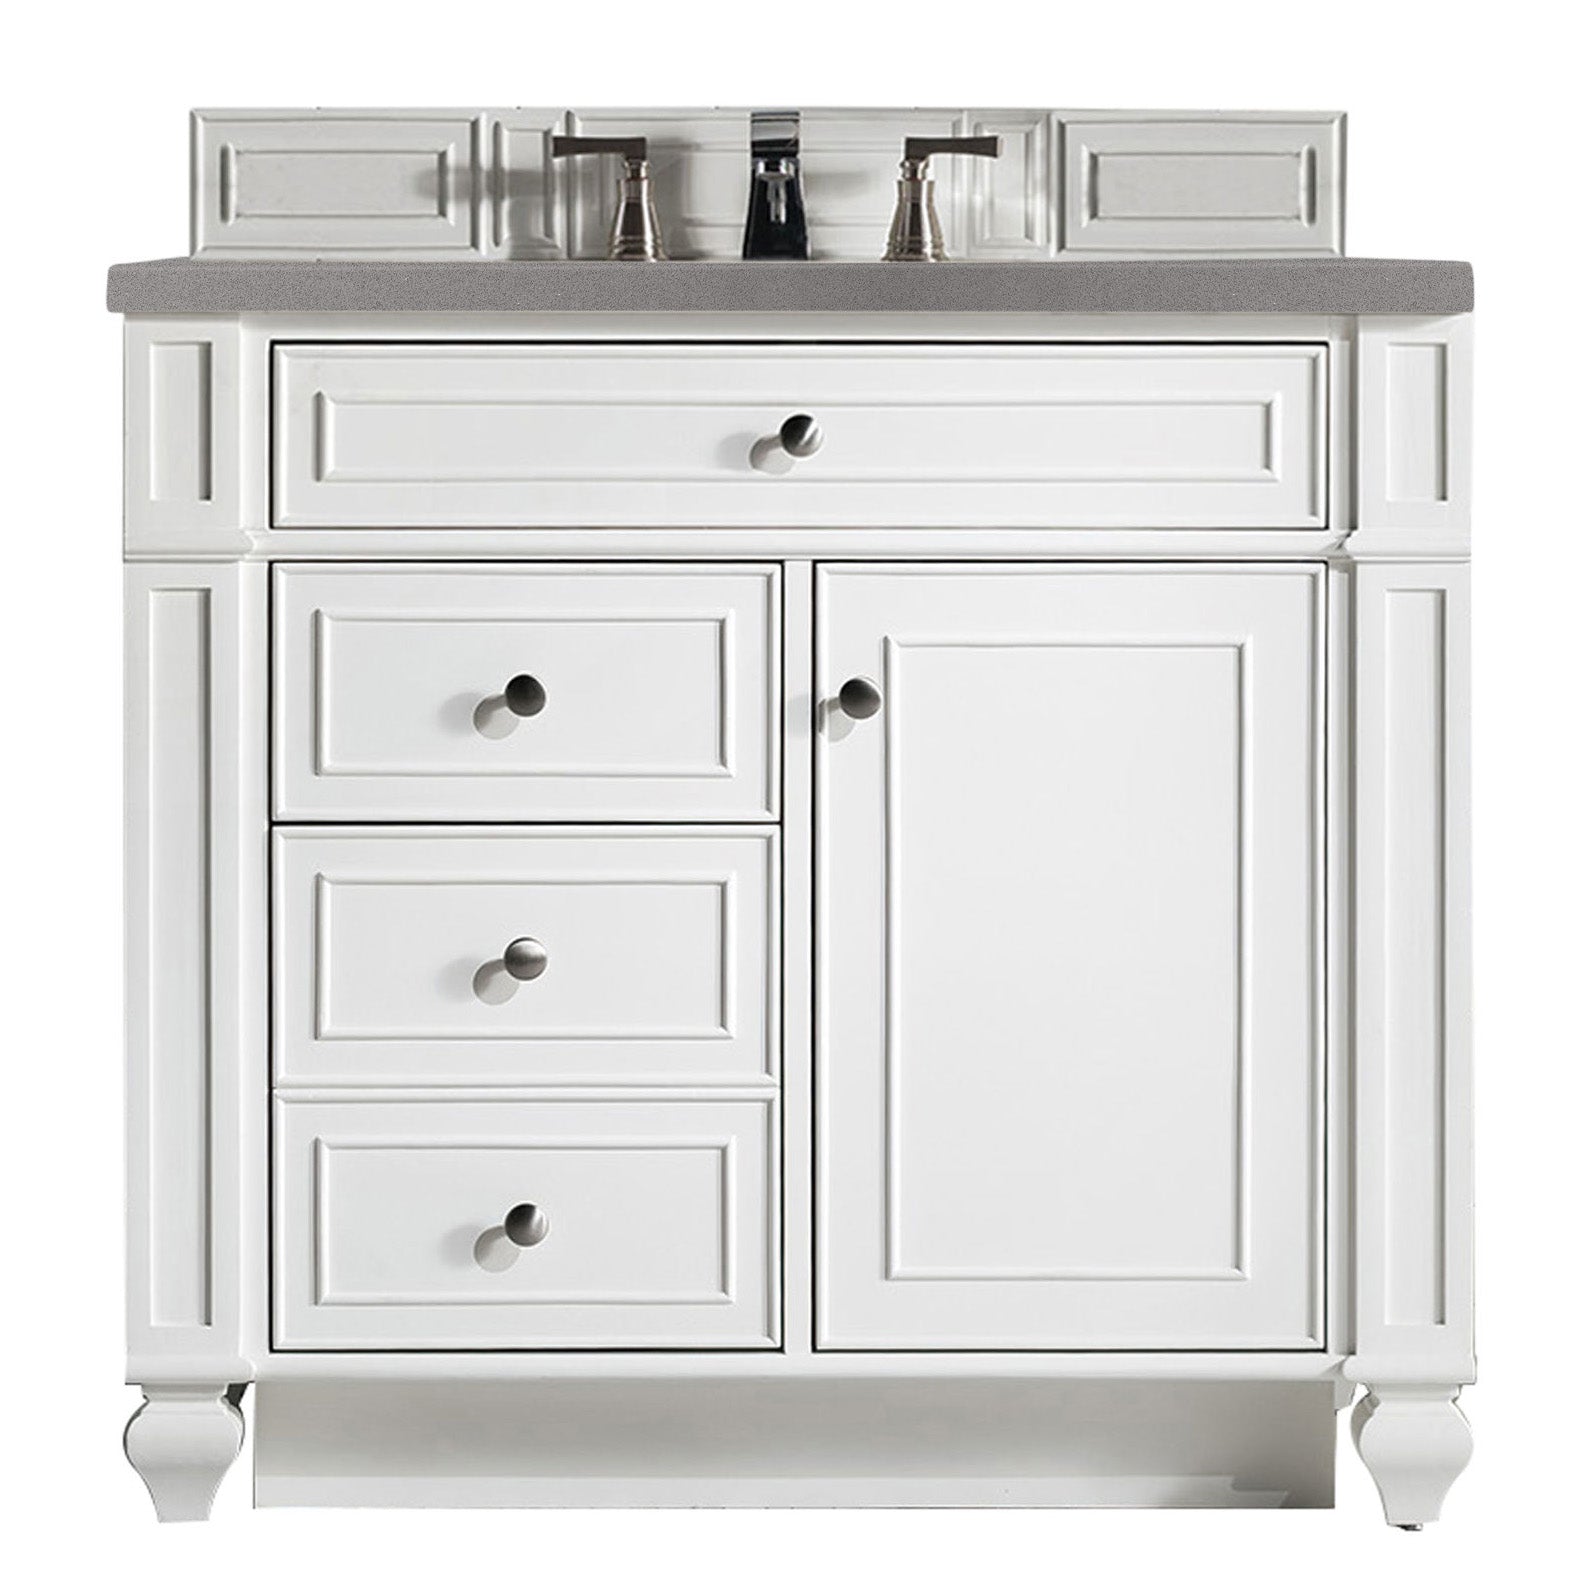 James Martin Vanities Bristol Collection 36 in. Single Vanity in Bright White with Countertop Options Grey Expo Quartz